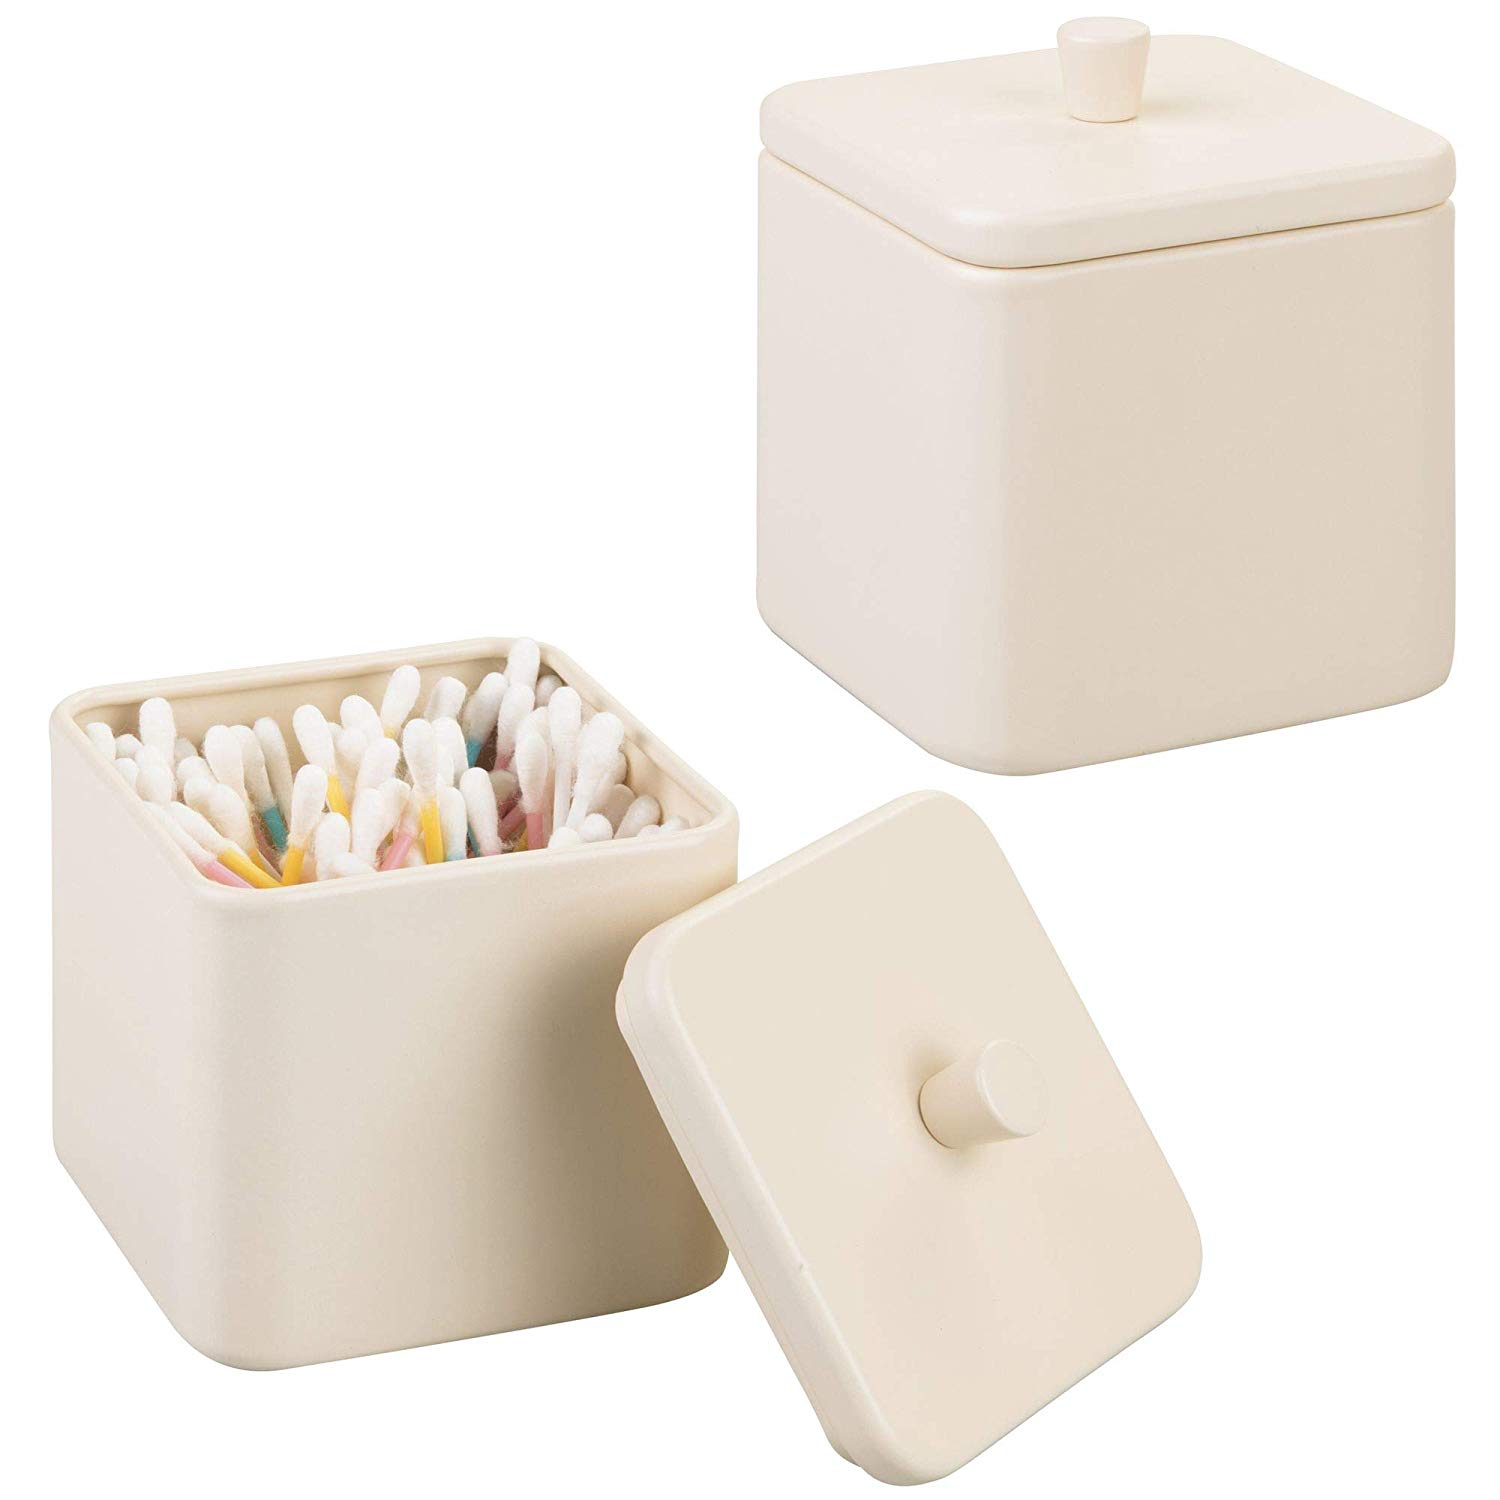 Mdesign Bathroom Vanity Countertop Storage Organizer Canister Jars within proportions 1500 X 1500